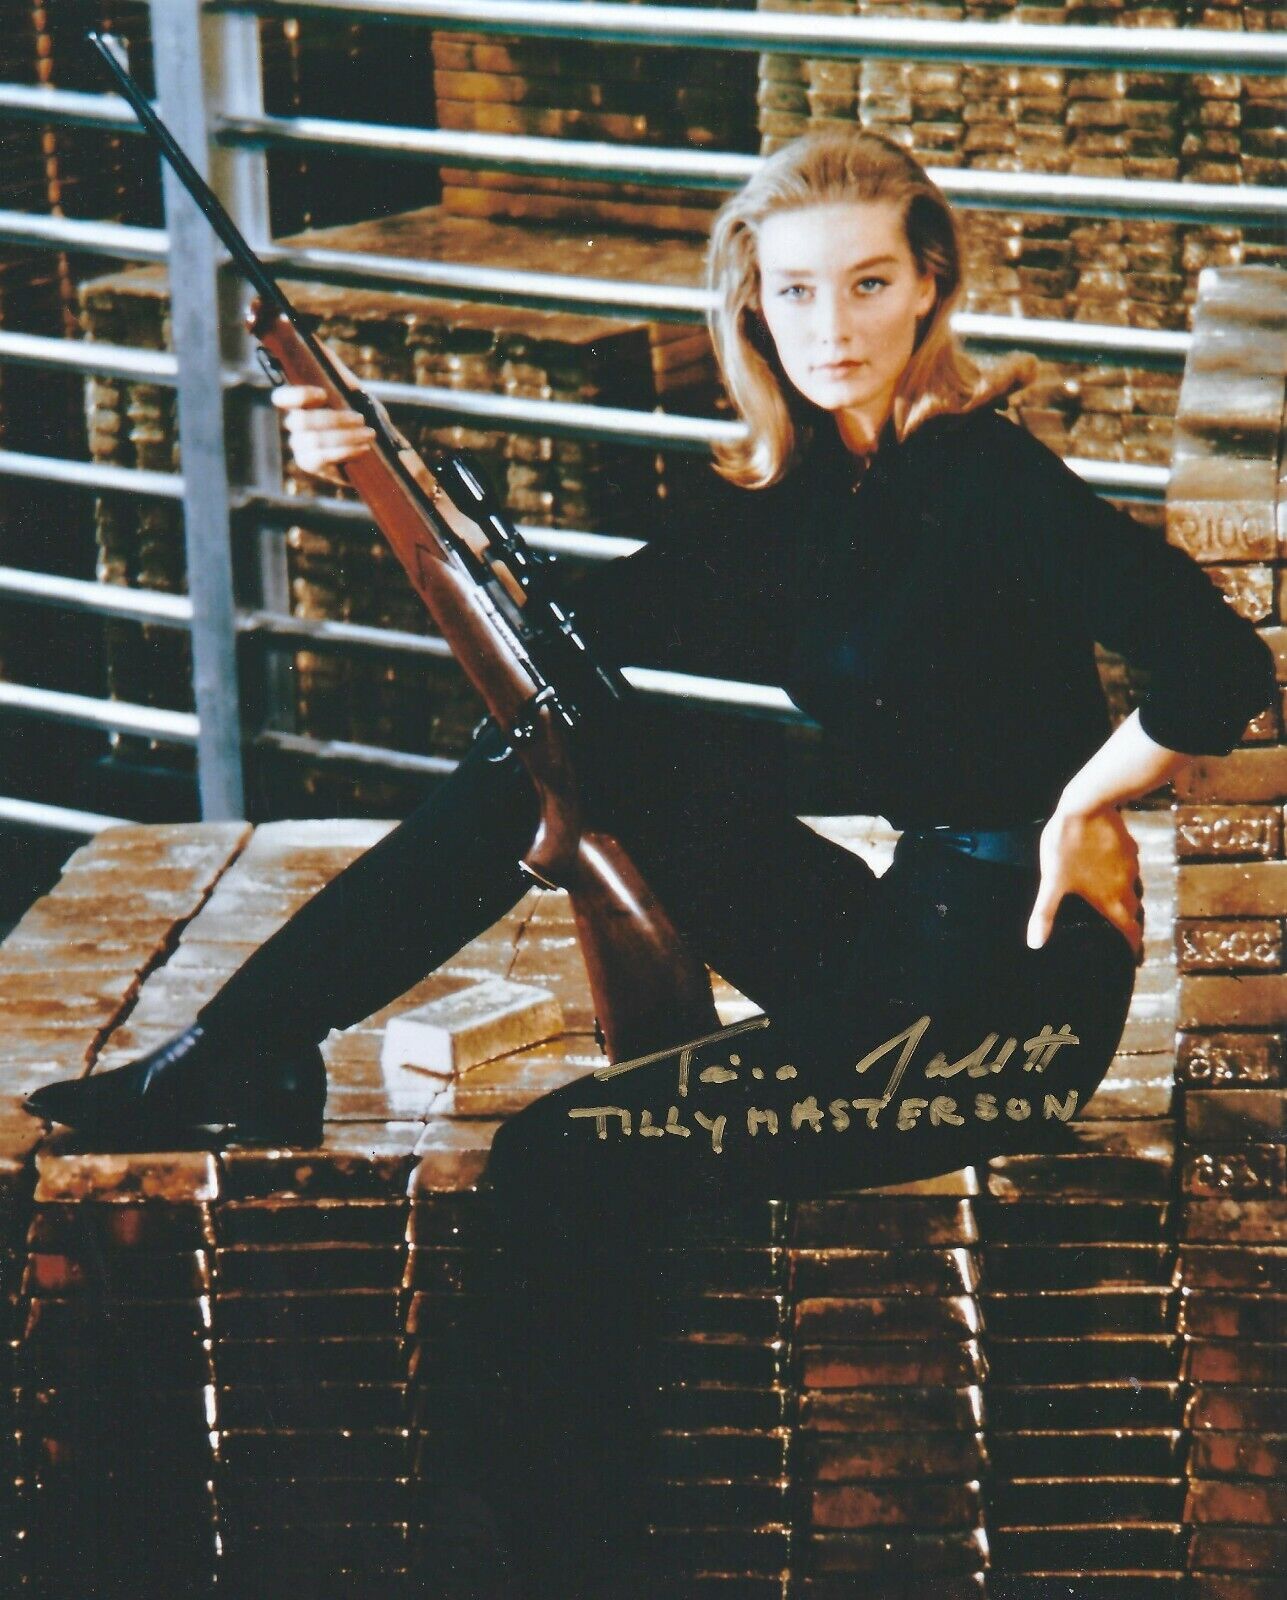 TANIA MALLET SIGNED 007 JAMES BOND GOLDFINGER 8x10 Photo Poster painting 1 UACC RD AUTOGRAPH